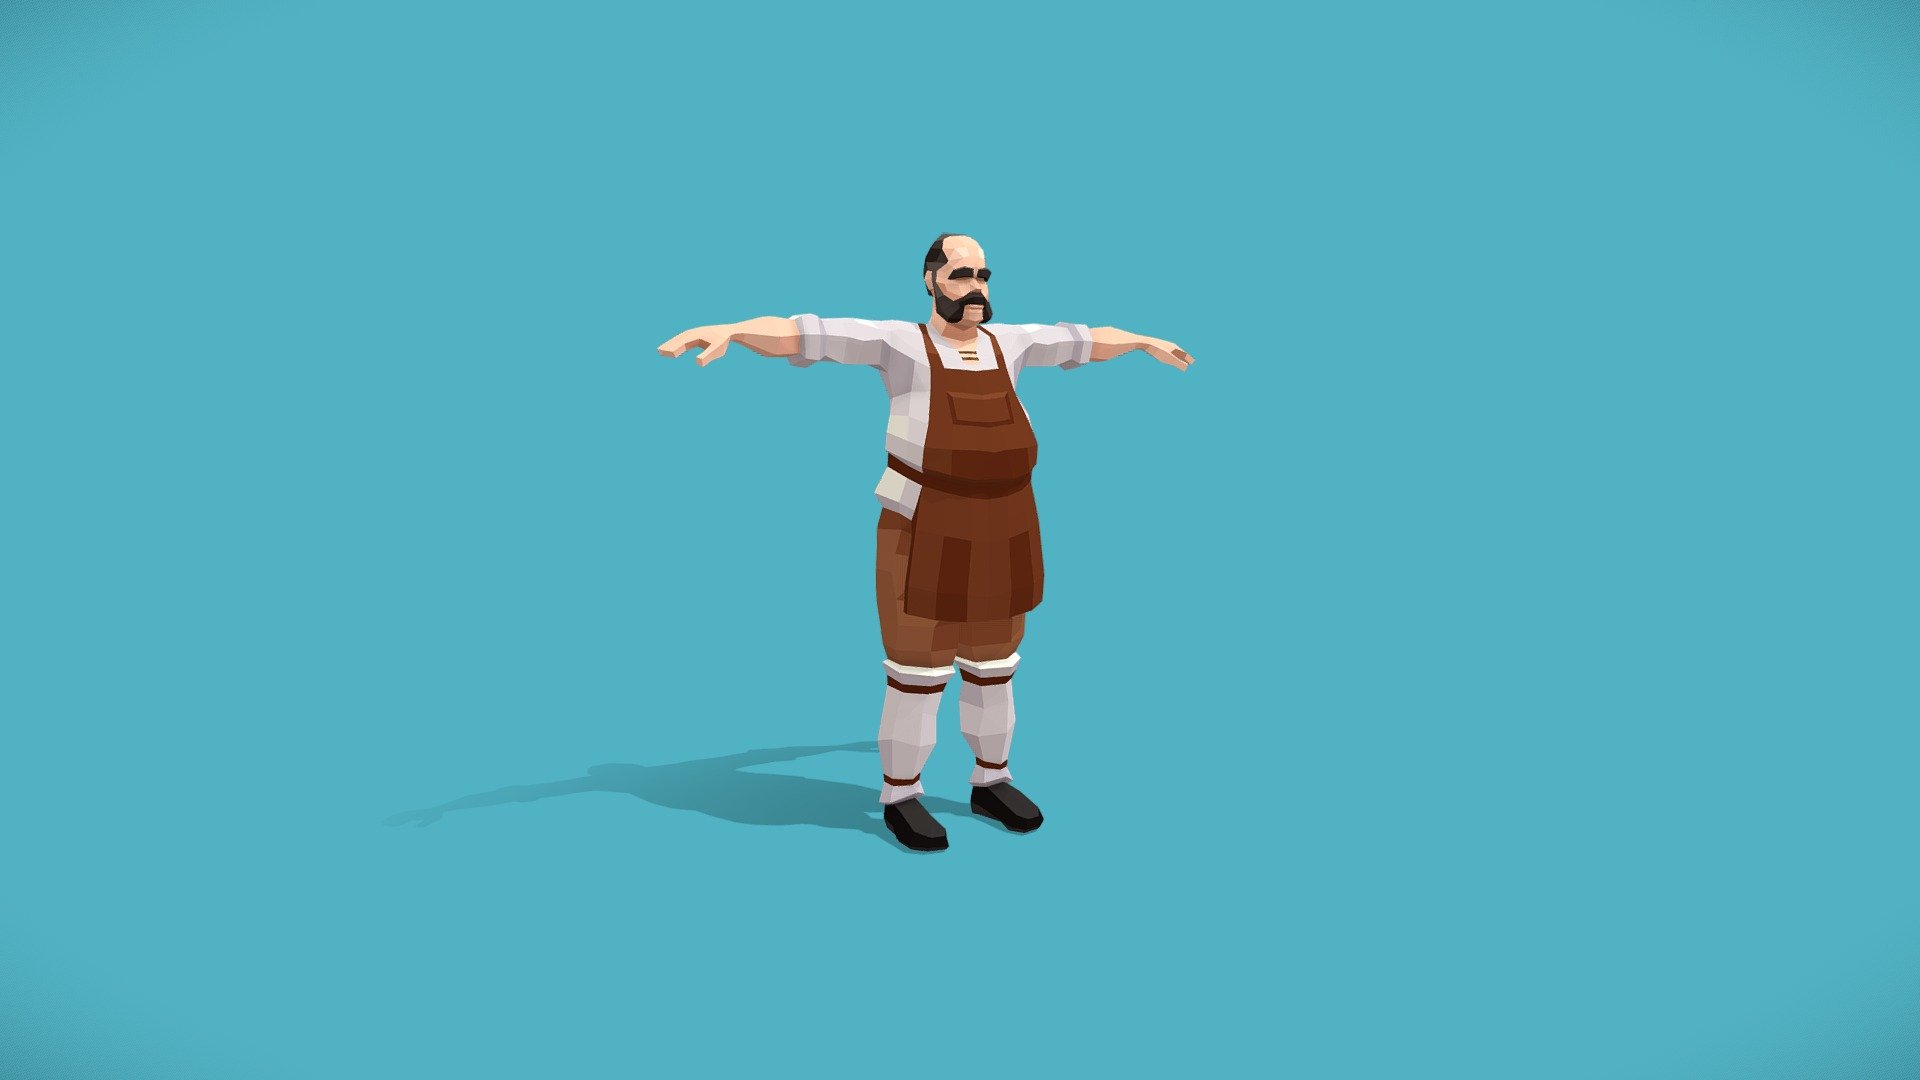 Charming Innkeeper, crafted in low poly style in a classic apron and ready for a bustling day, great addition to any medieval game environment. With a design that balances personality and simplicity.




Uses a very small color palette texture.

Basic rig(bones+skin) ready for animation compatible with Unity Humanoid System

Created with 3ds Max 2023. Included .MAX format as additional file 3d model